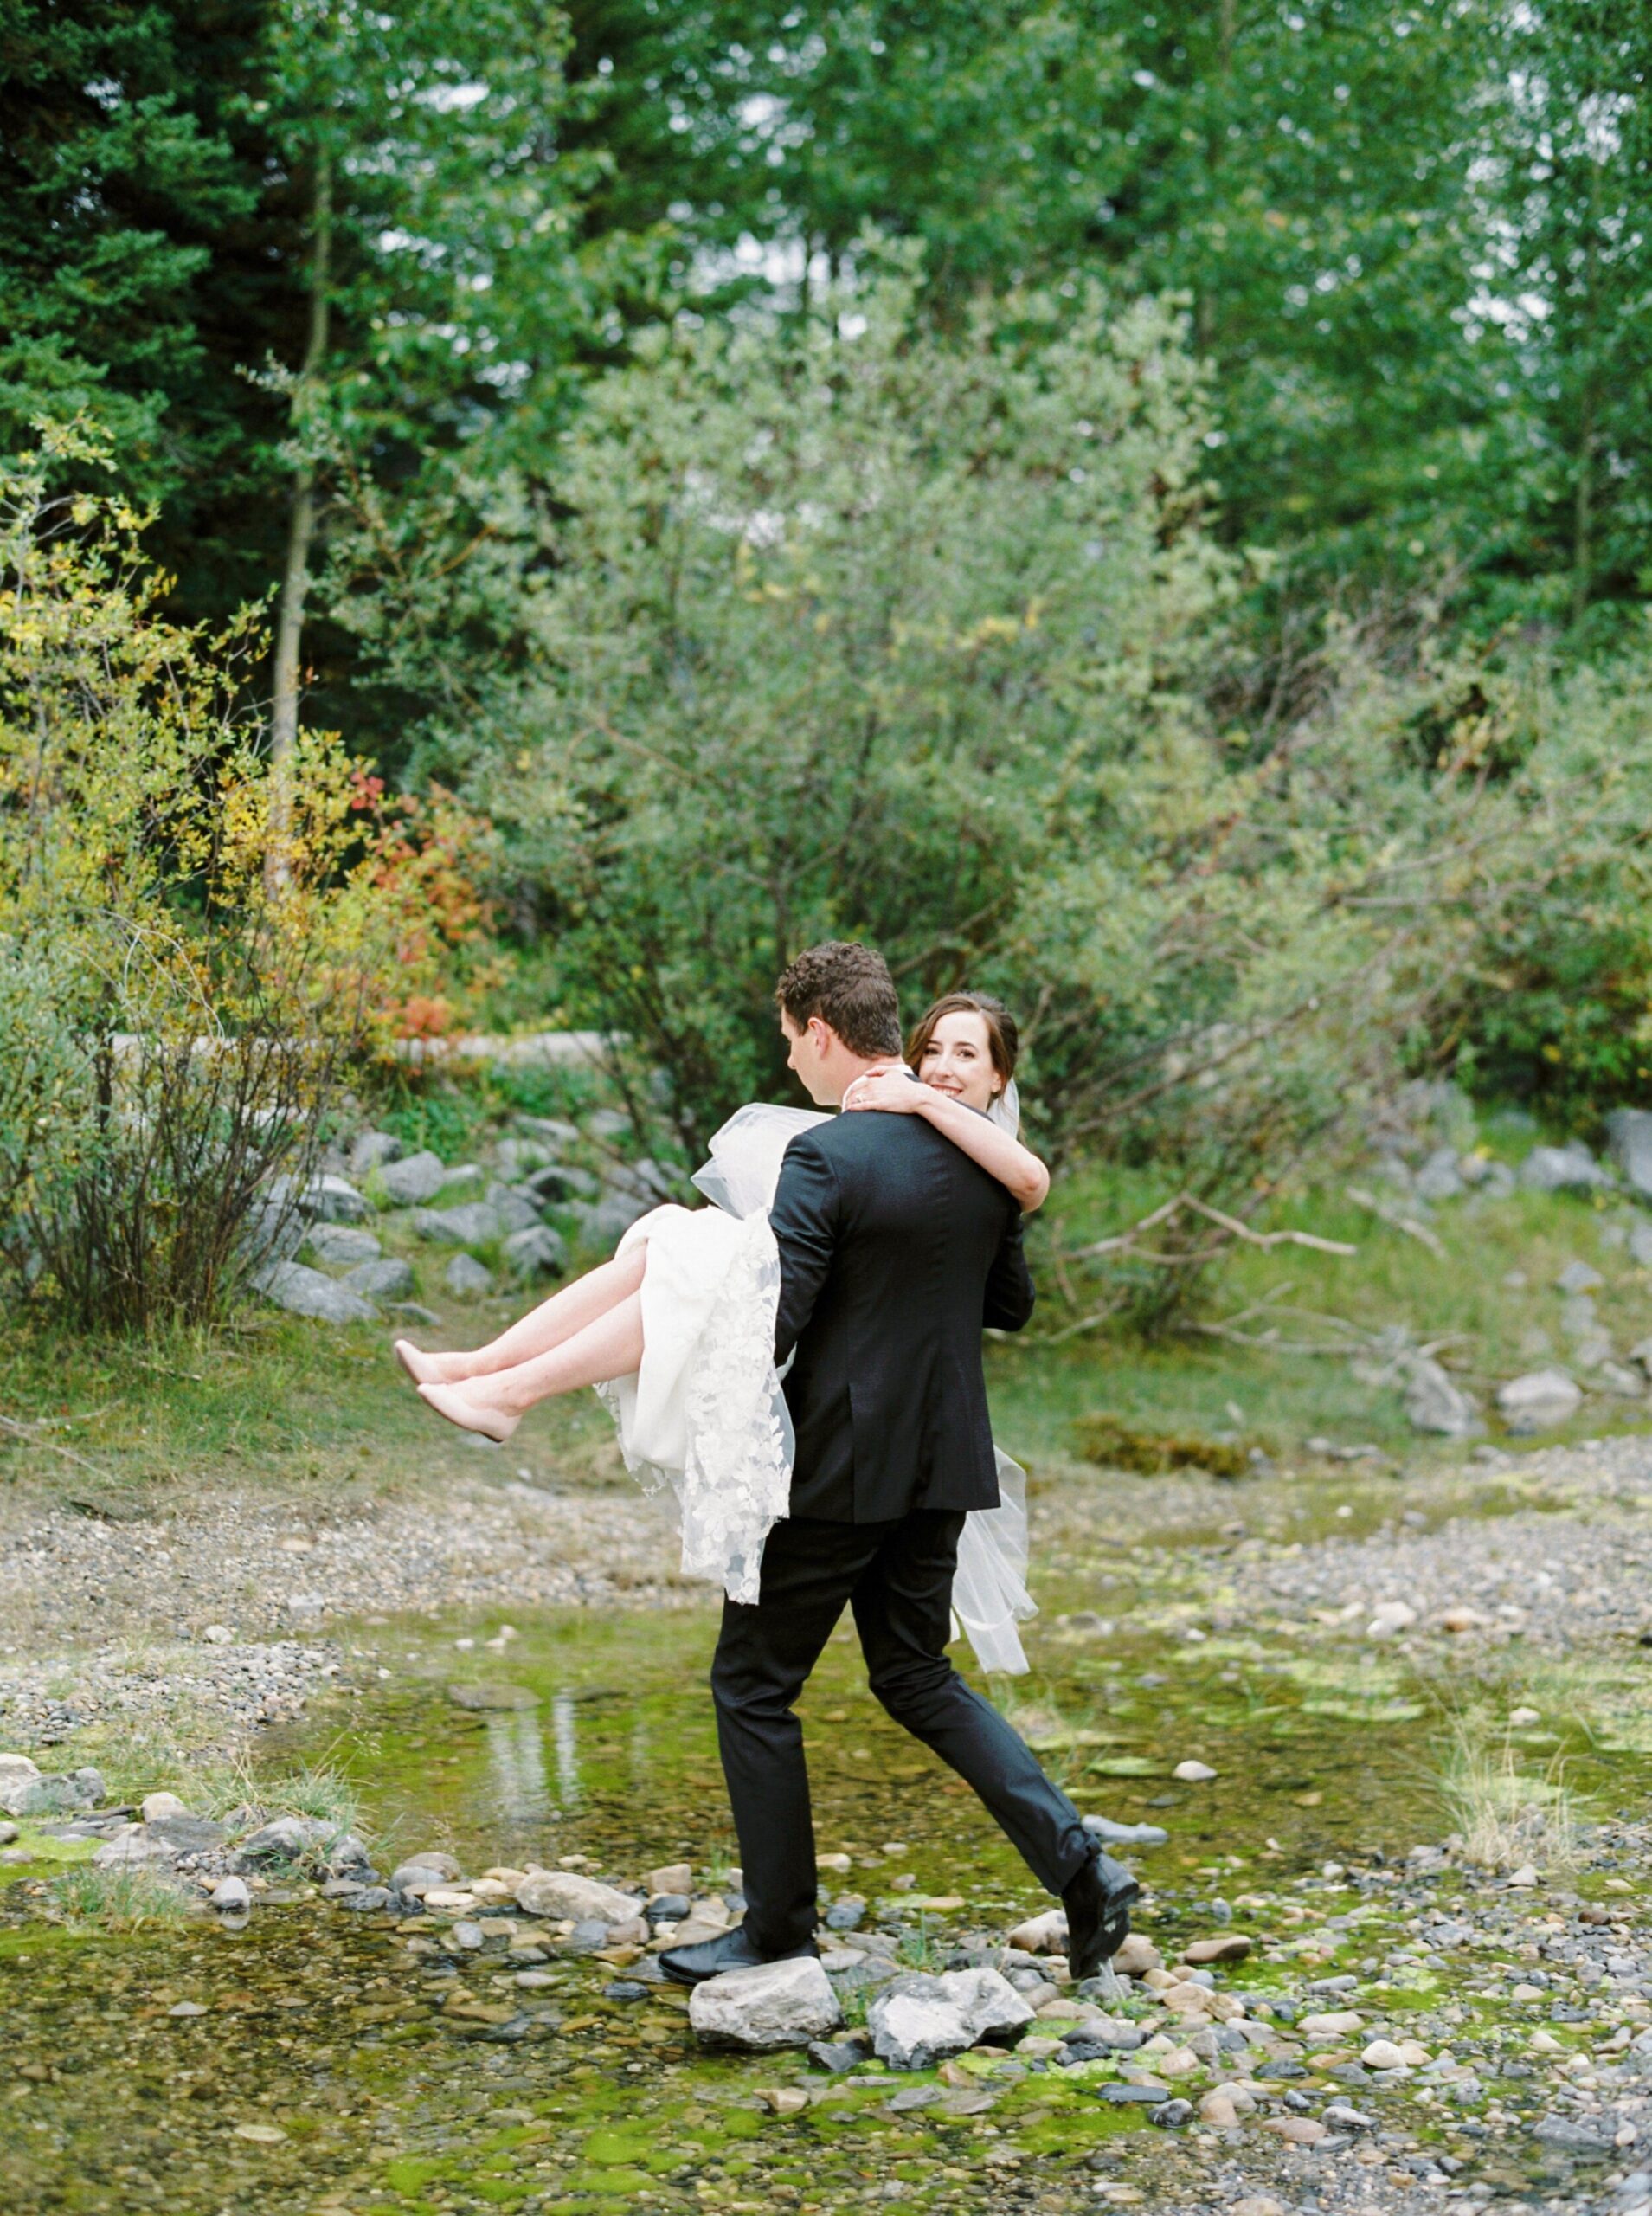  bride and groom portraits in the mountains | pose ideas | The Malcom Canmore Wedding Photographer | Fine Art film wedding photoraphy | portra 400 